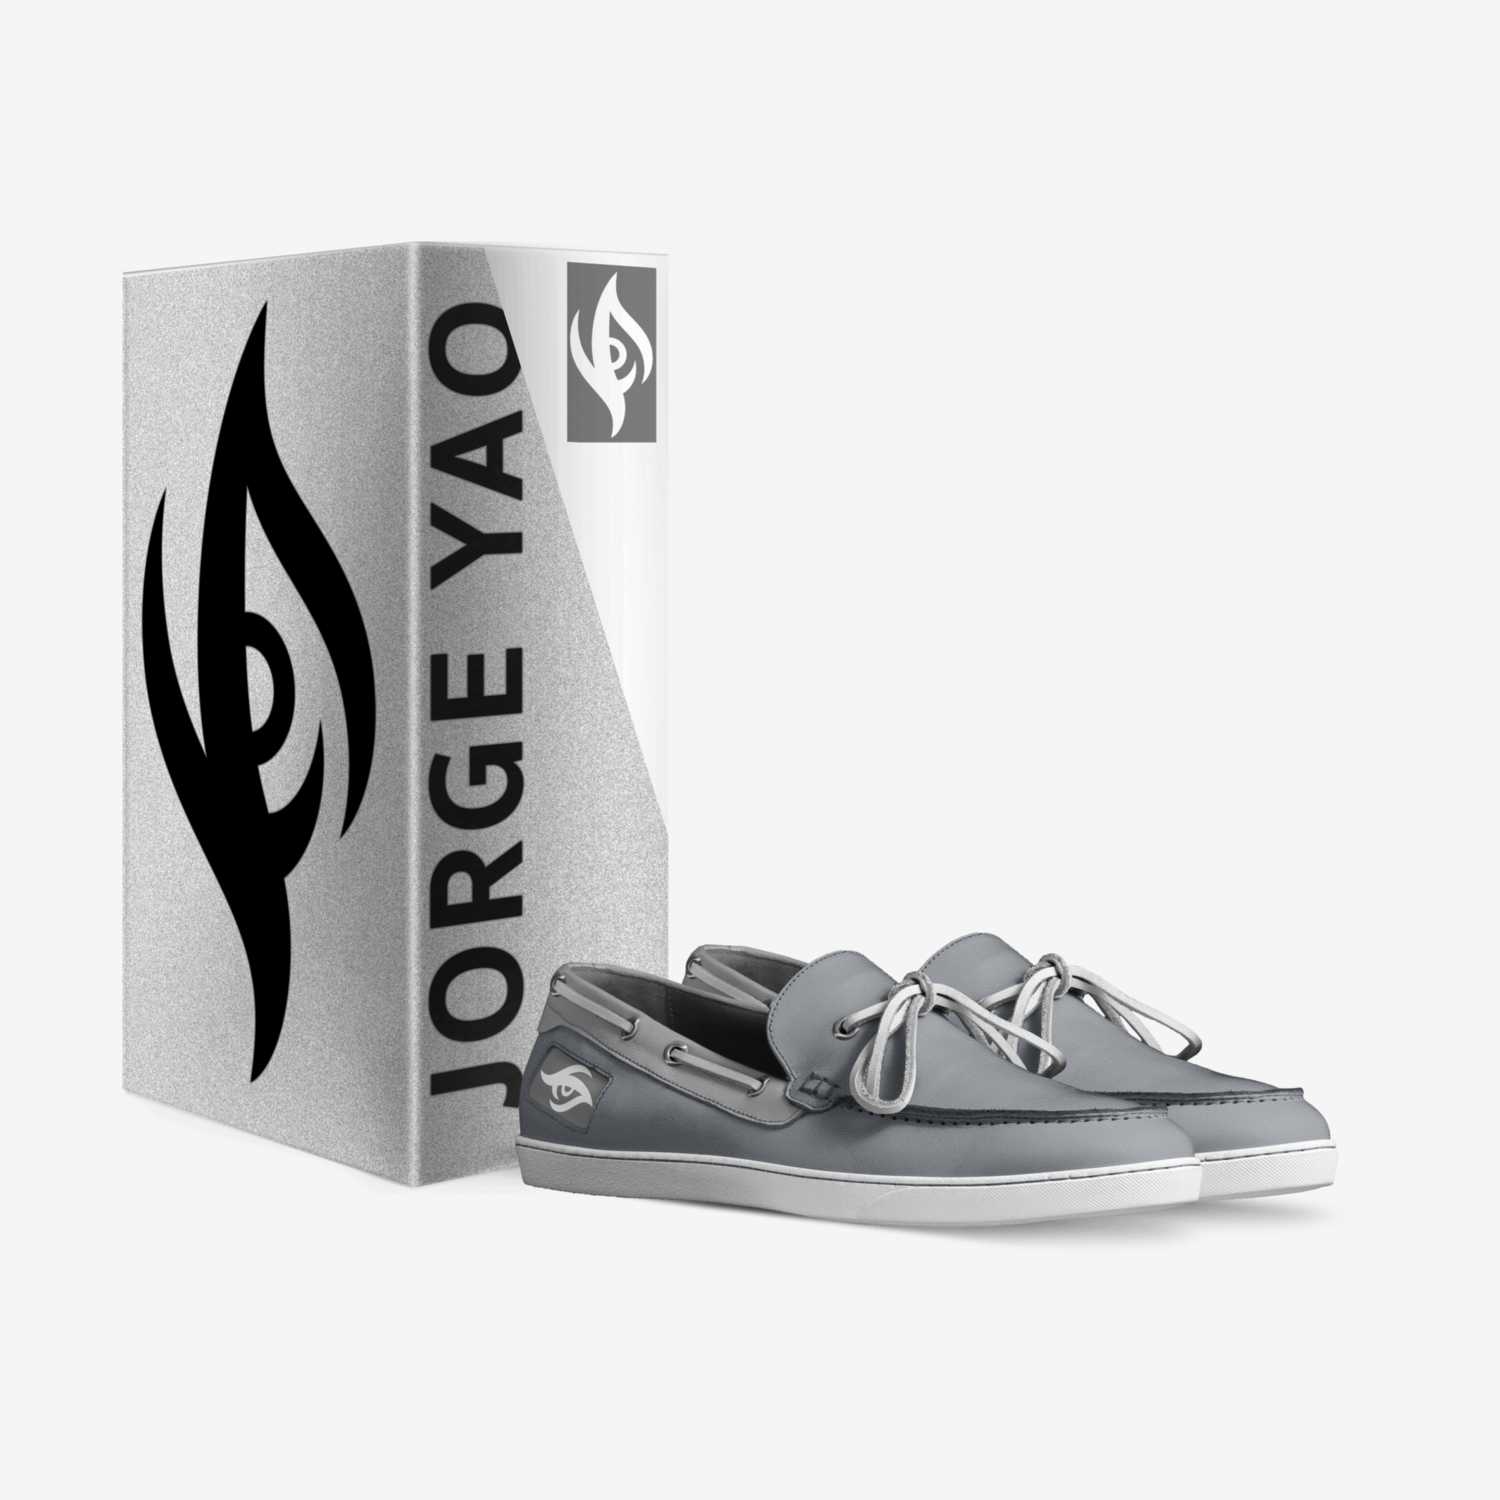 Jorge Yao Boats custom made in Italy shoes by George Yao | Box view